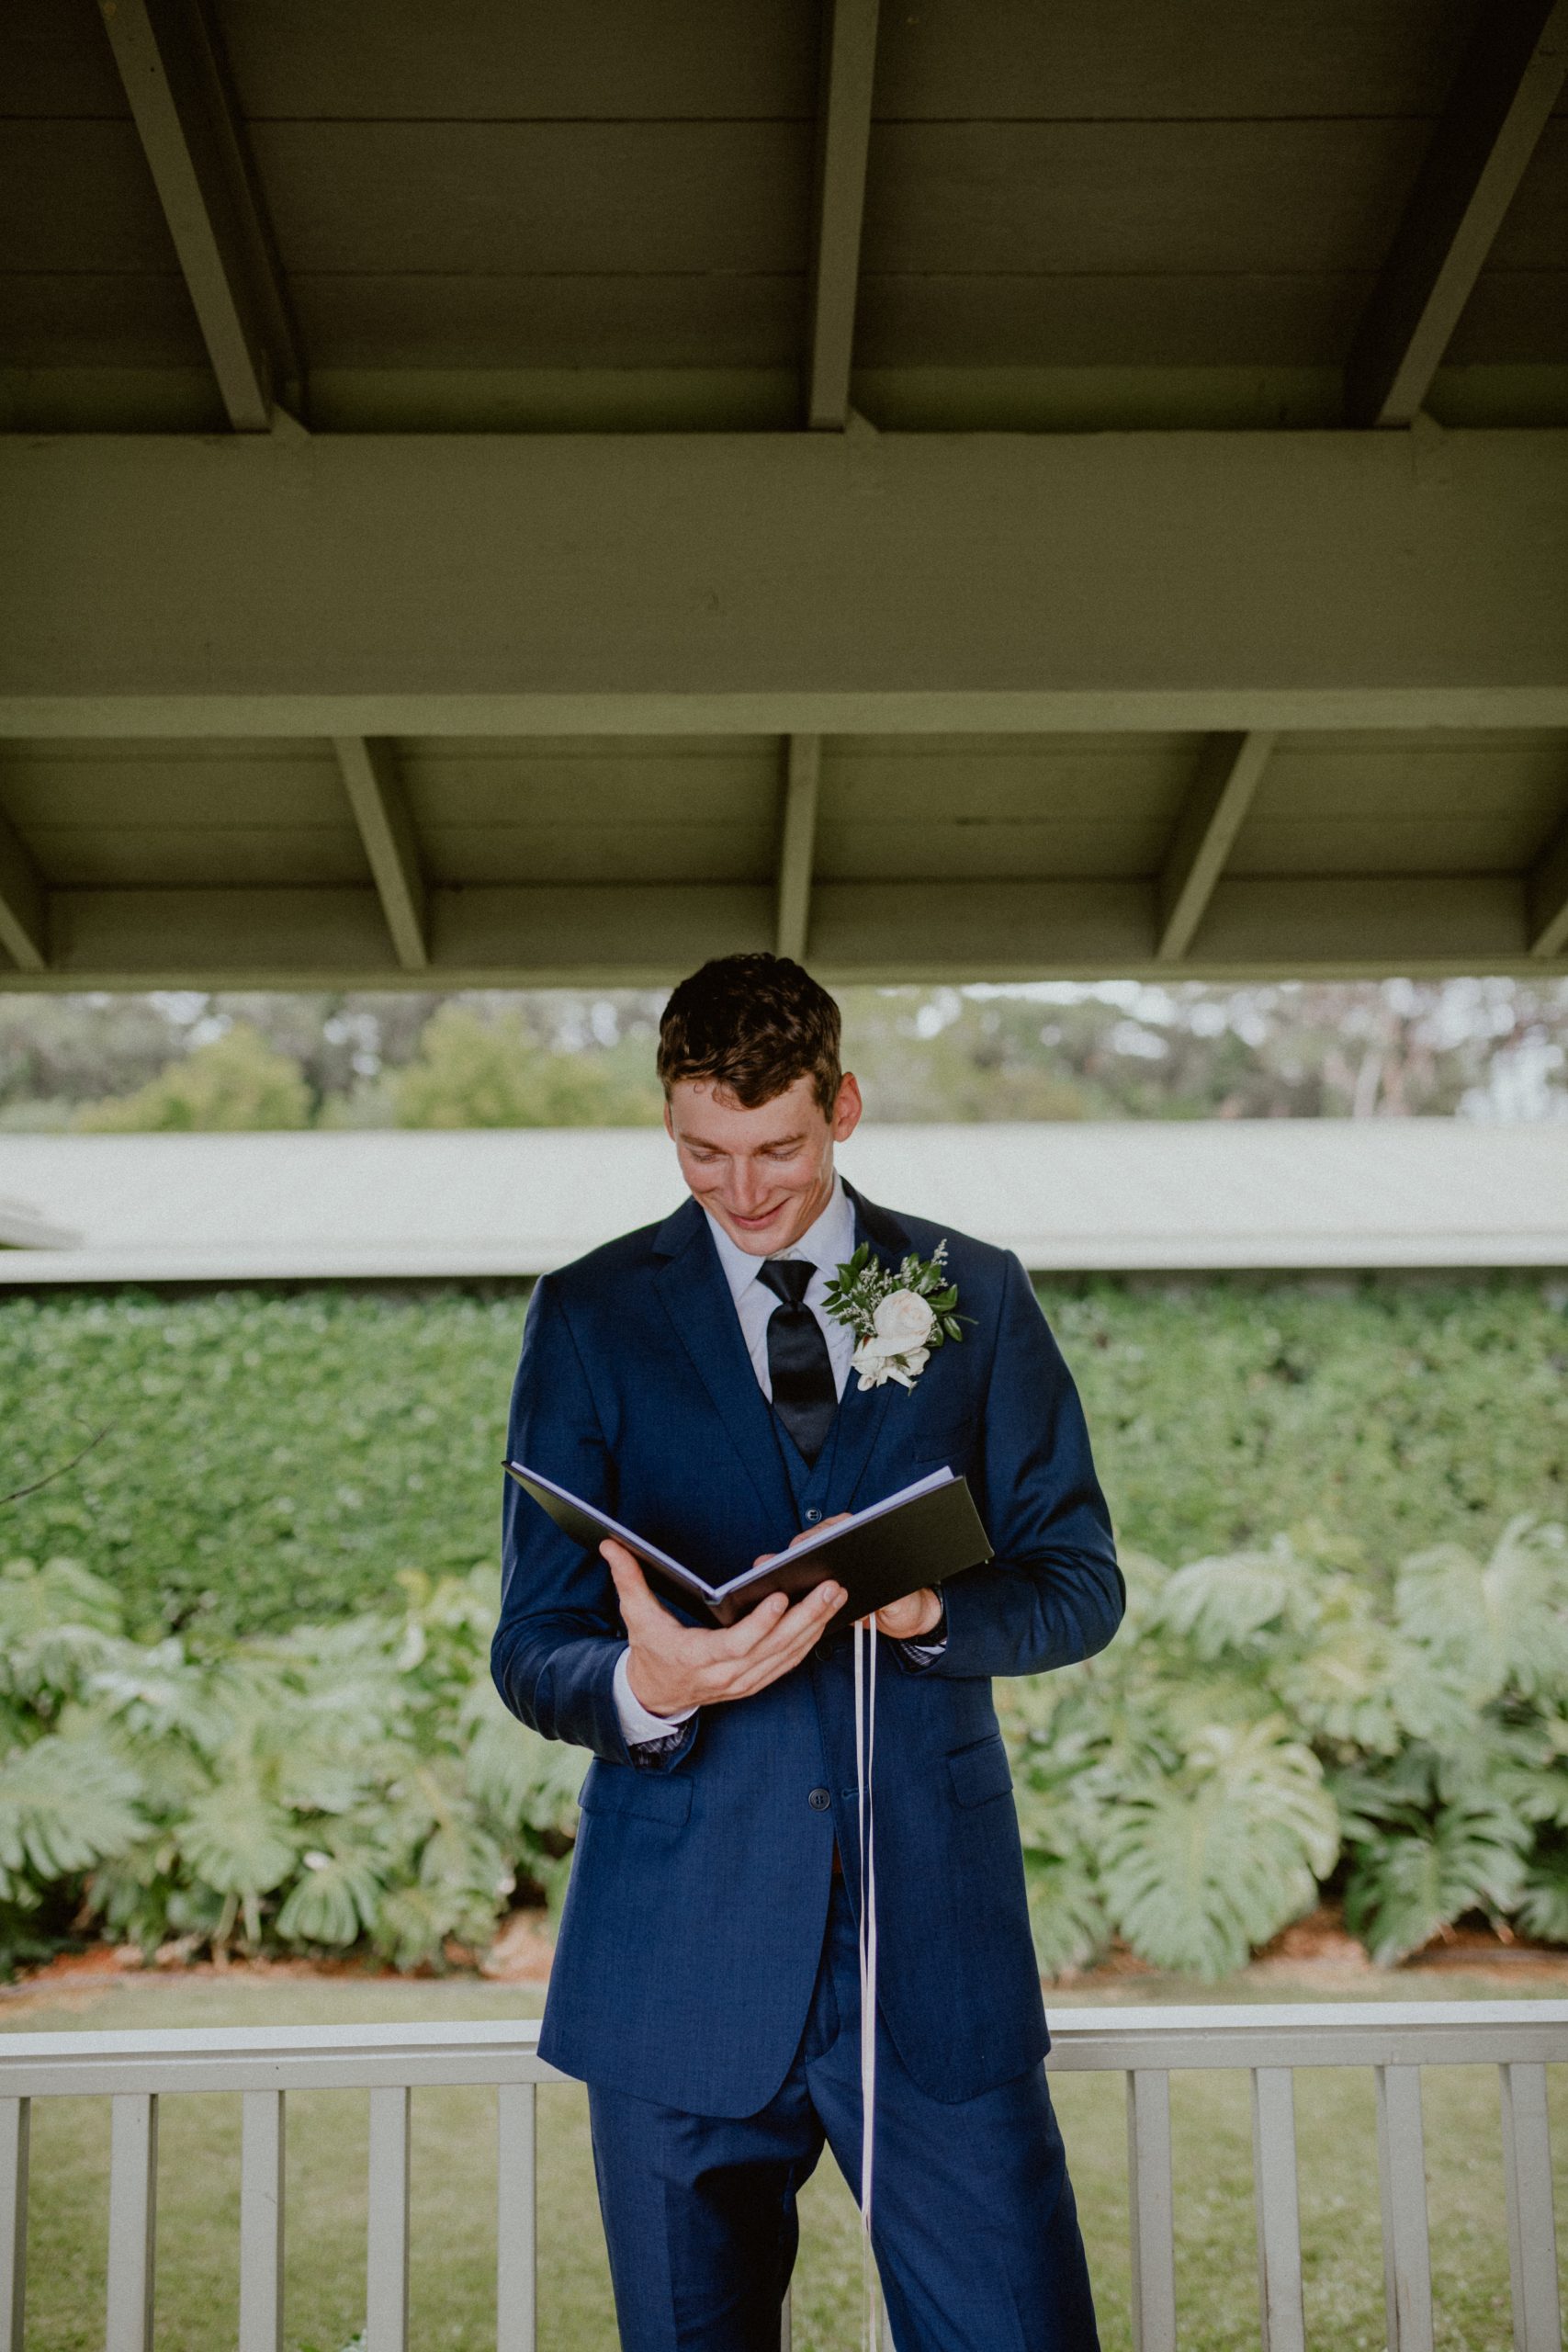 Groom reads wedding day note from bride out of a black journal while wearing white floral boutonniere | Oahu Wedding Photographer, Oahu Elopement Photographer, Destination Wedding Photographer, Destination Elopement Photographer, Newlywed moments ideas, Newlywed Photography inspiration, Hawaii Elopement ideas | chelseaabril.com